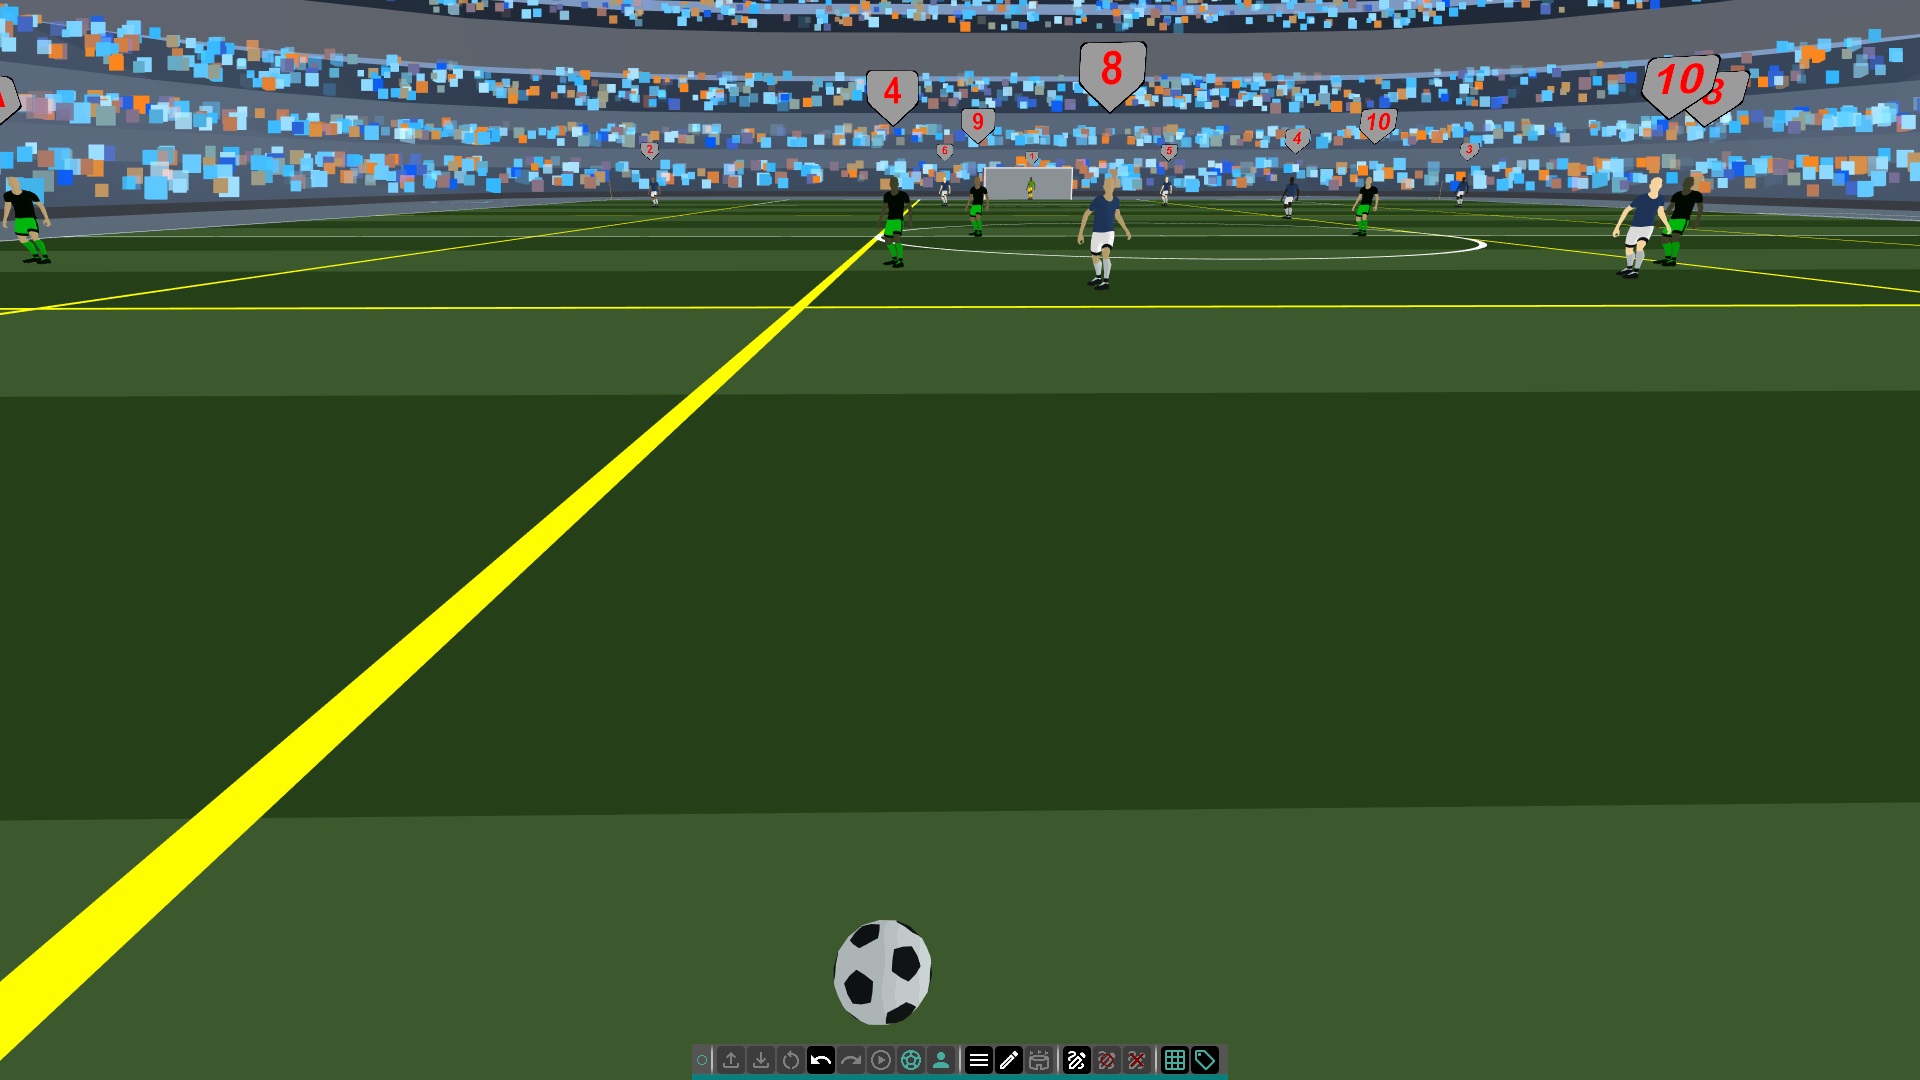 Player view on soccer field